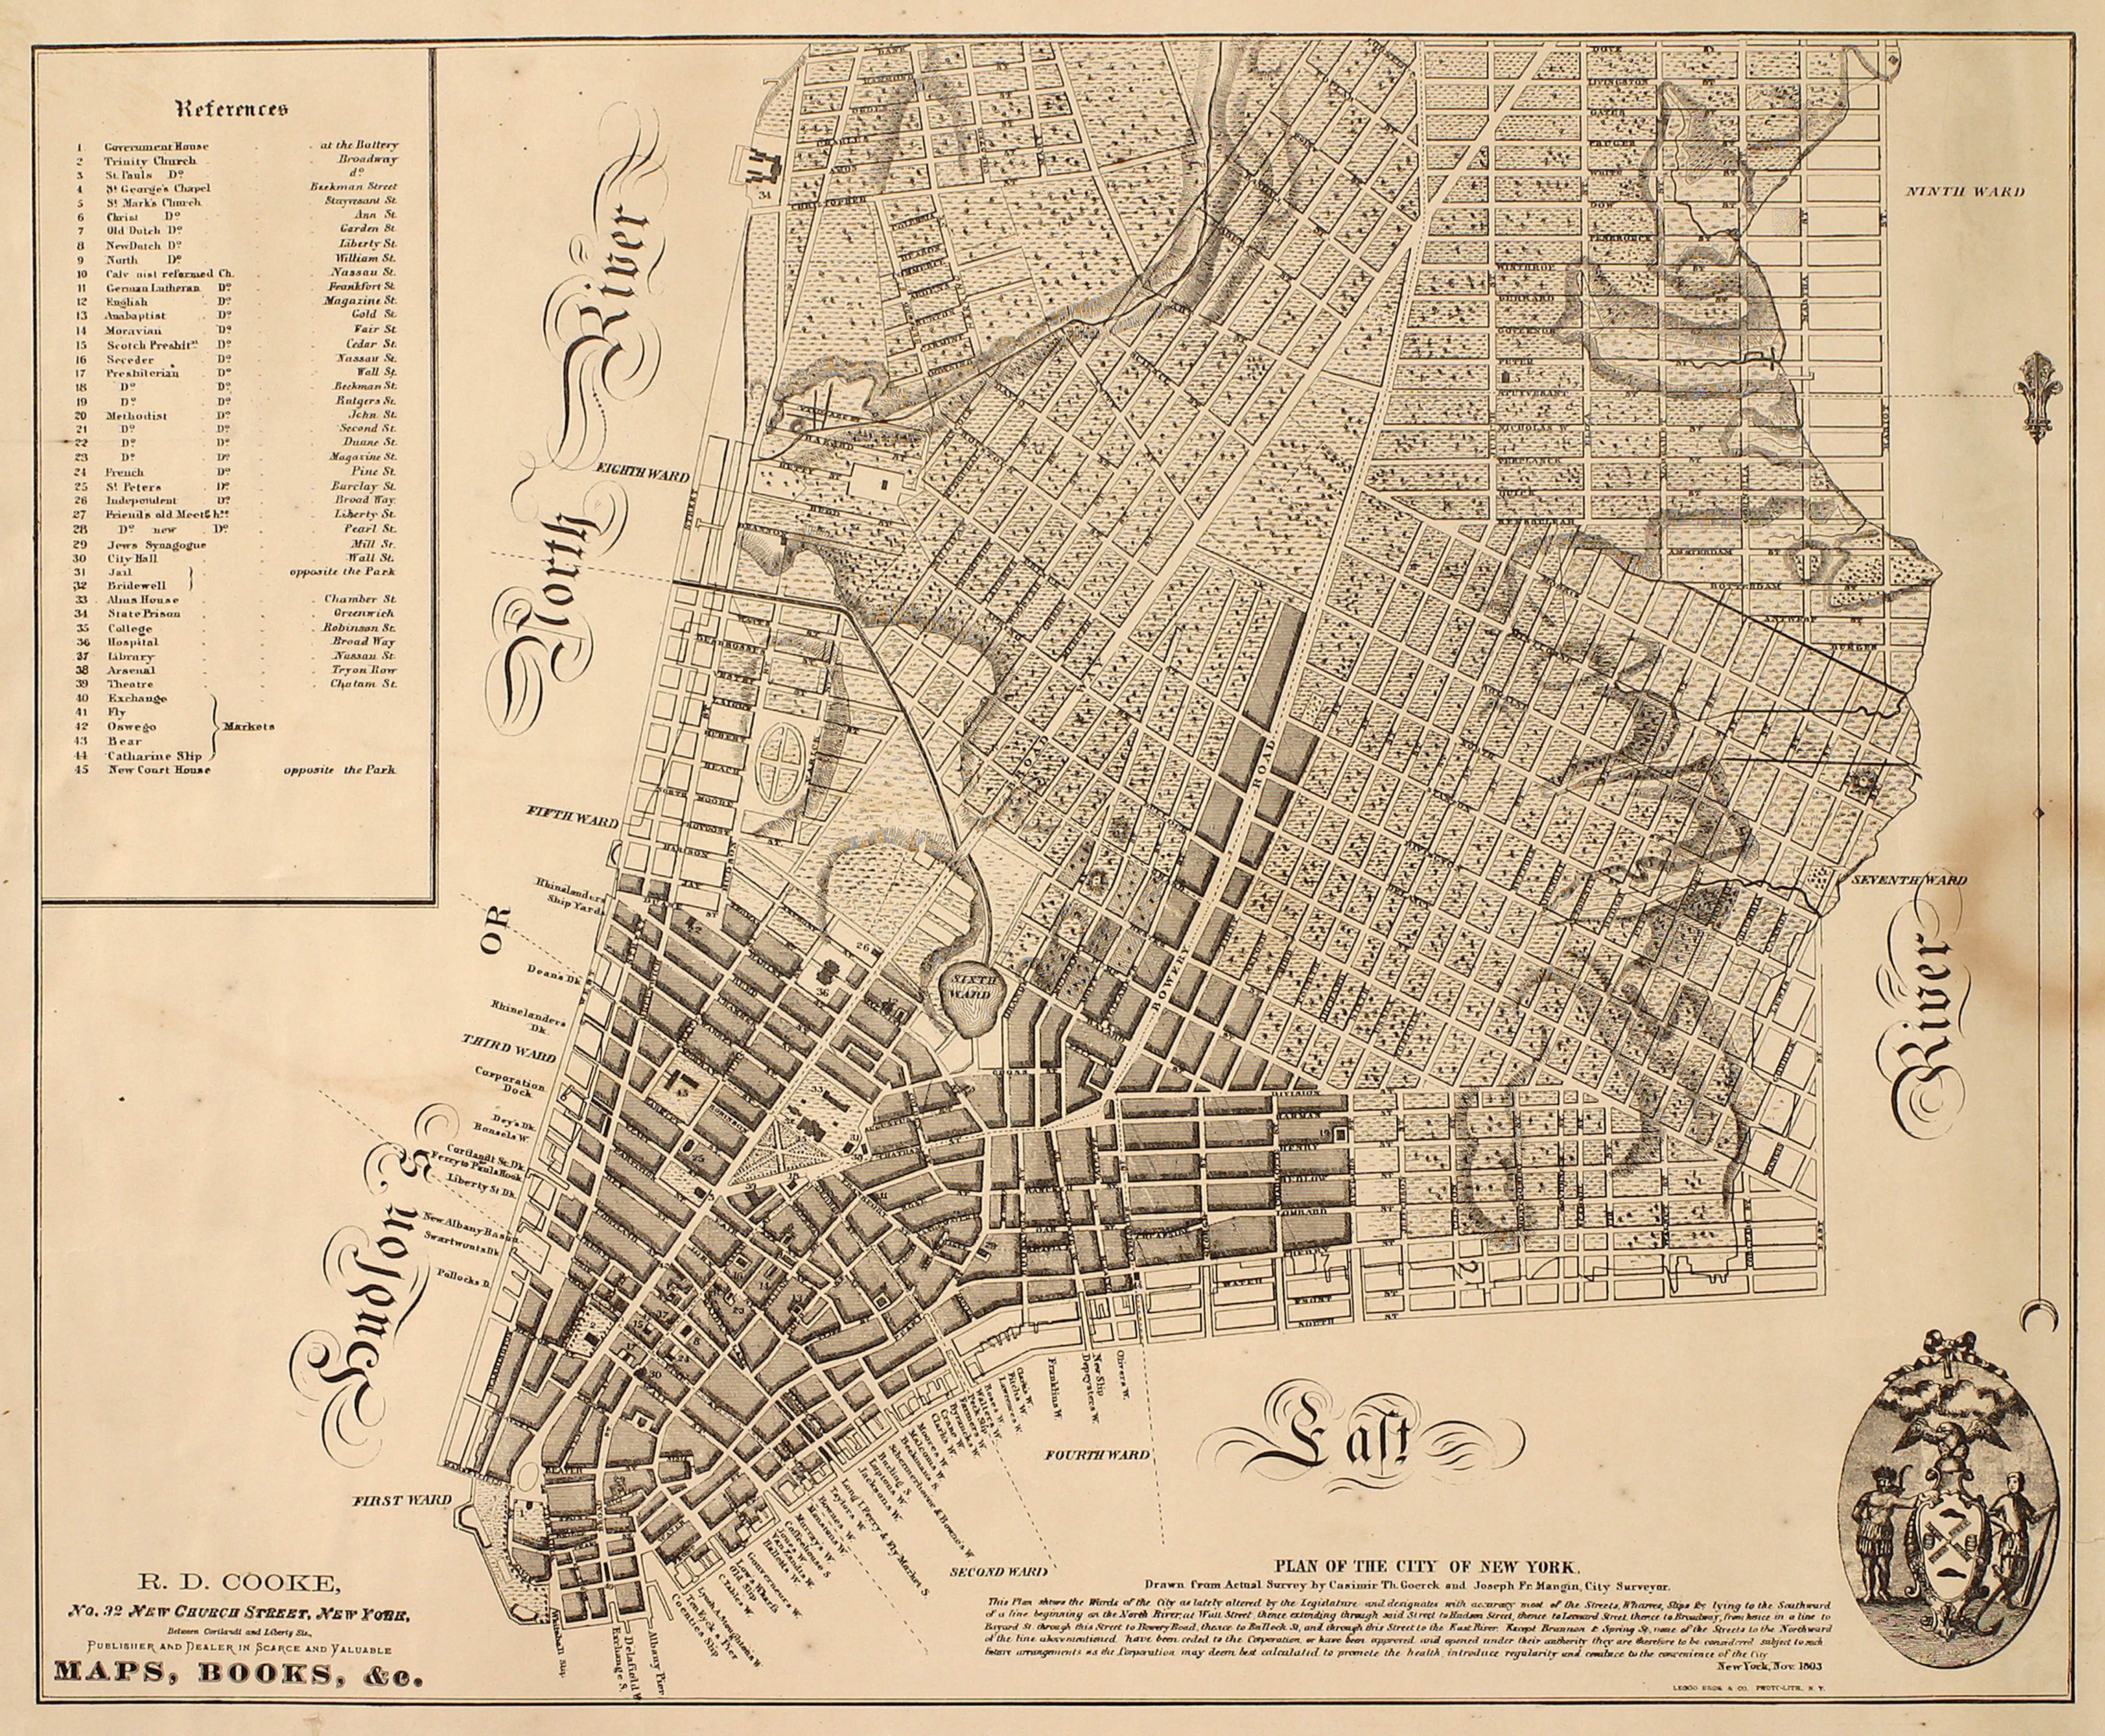 Plan of the City of New-York, as far north as East 31st Street, by William Hooke, 1817. Black ink on paper, backed with cloth by William Hooker. (The New York Historical Society / Getty Images)